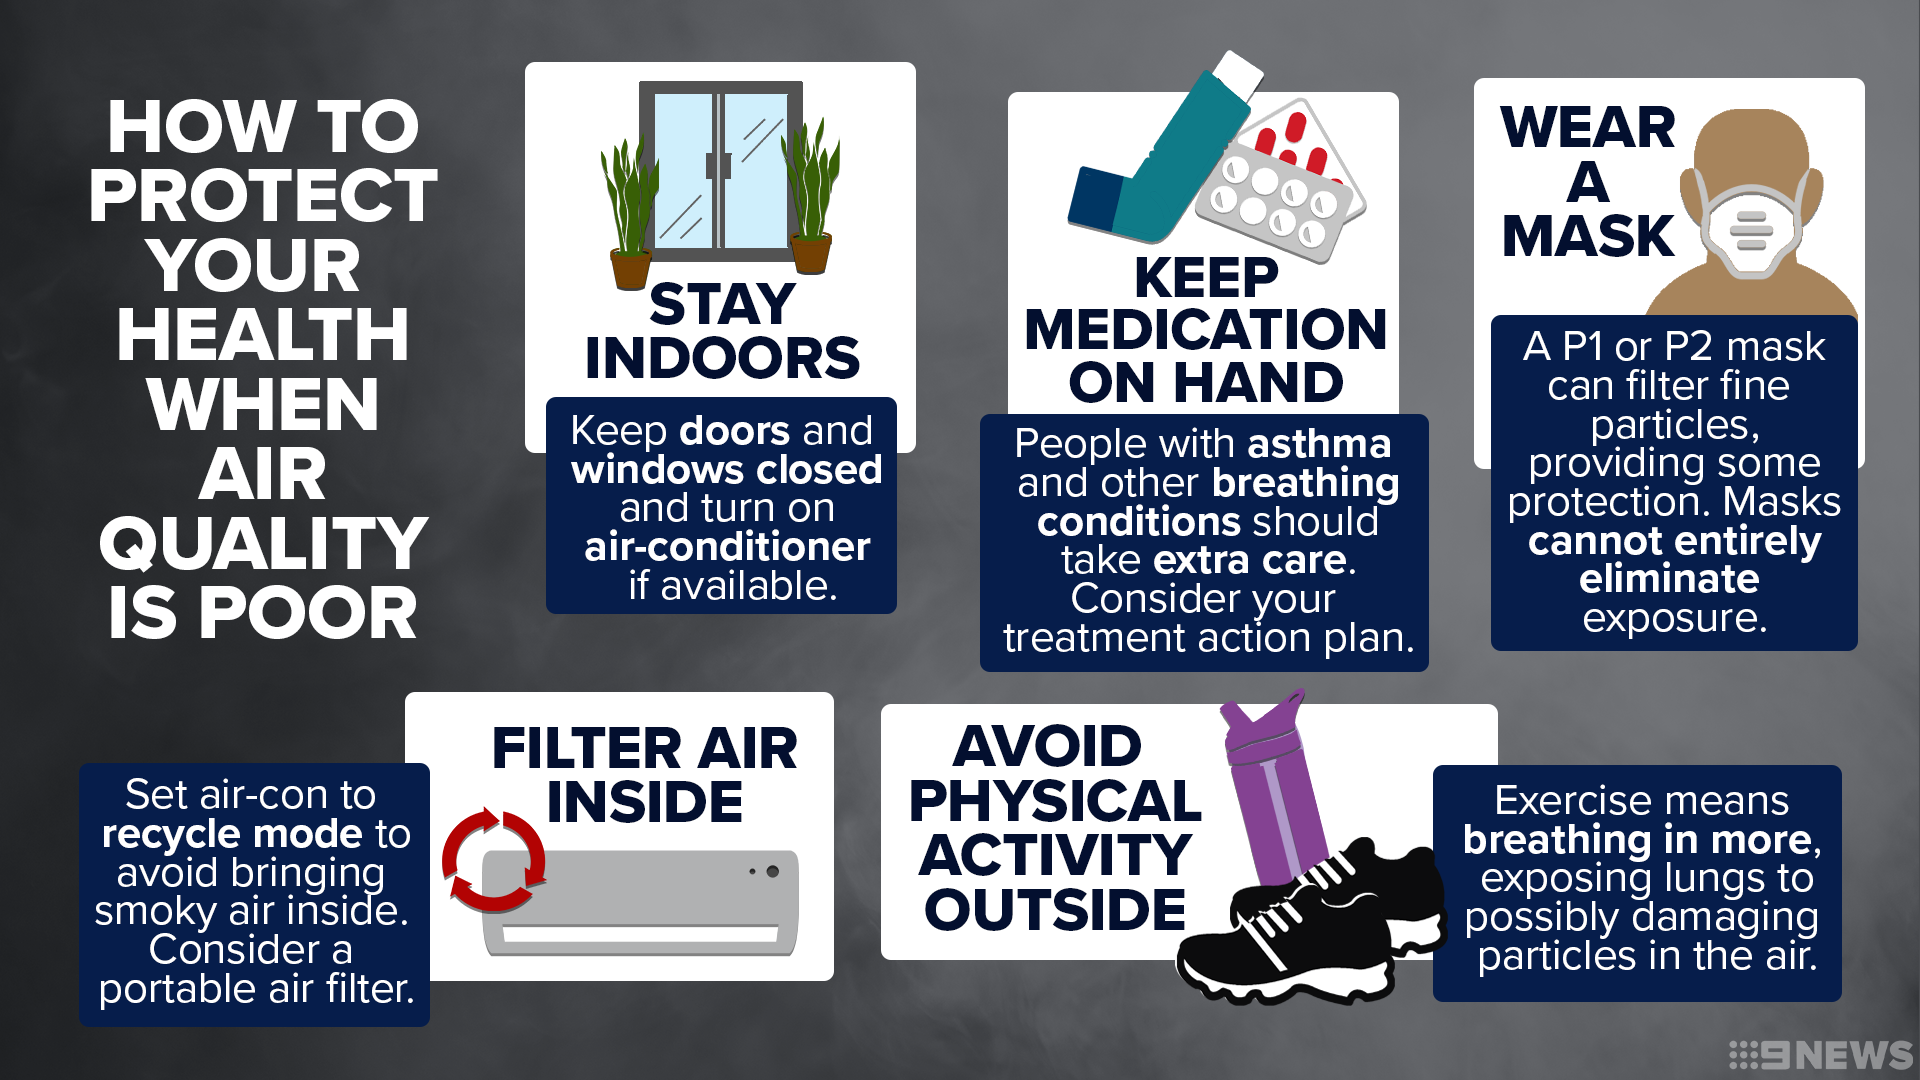 How to protect yourself during poor air quality conditions.